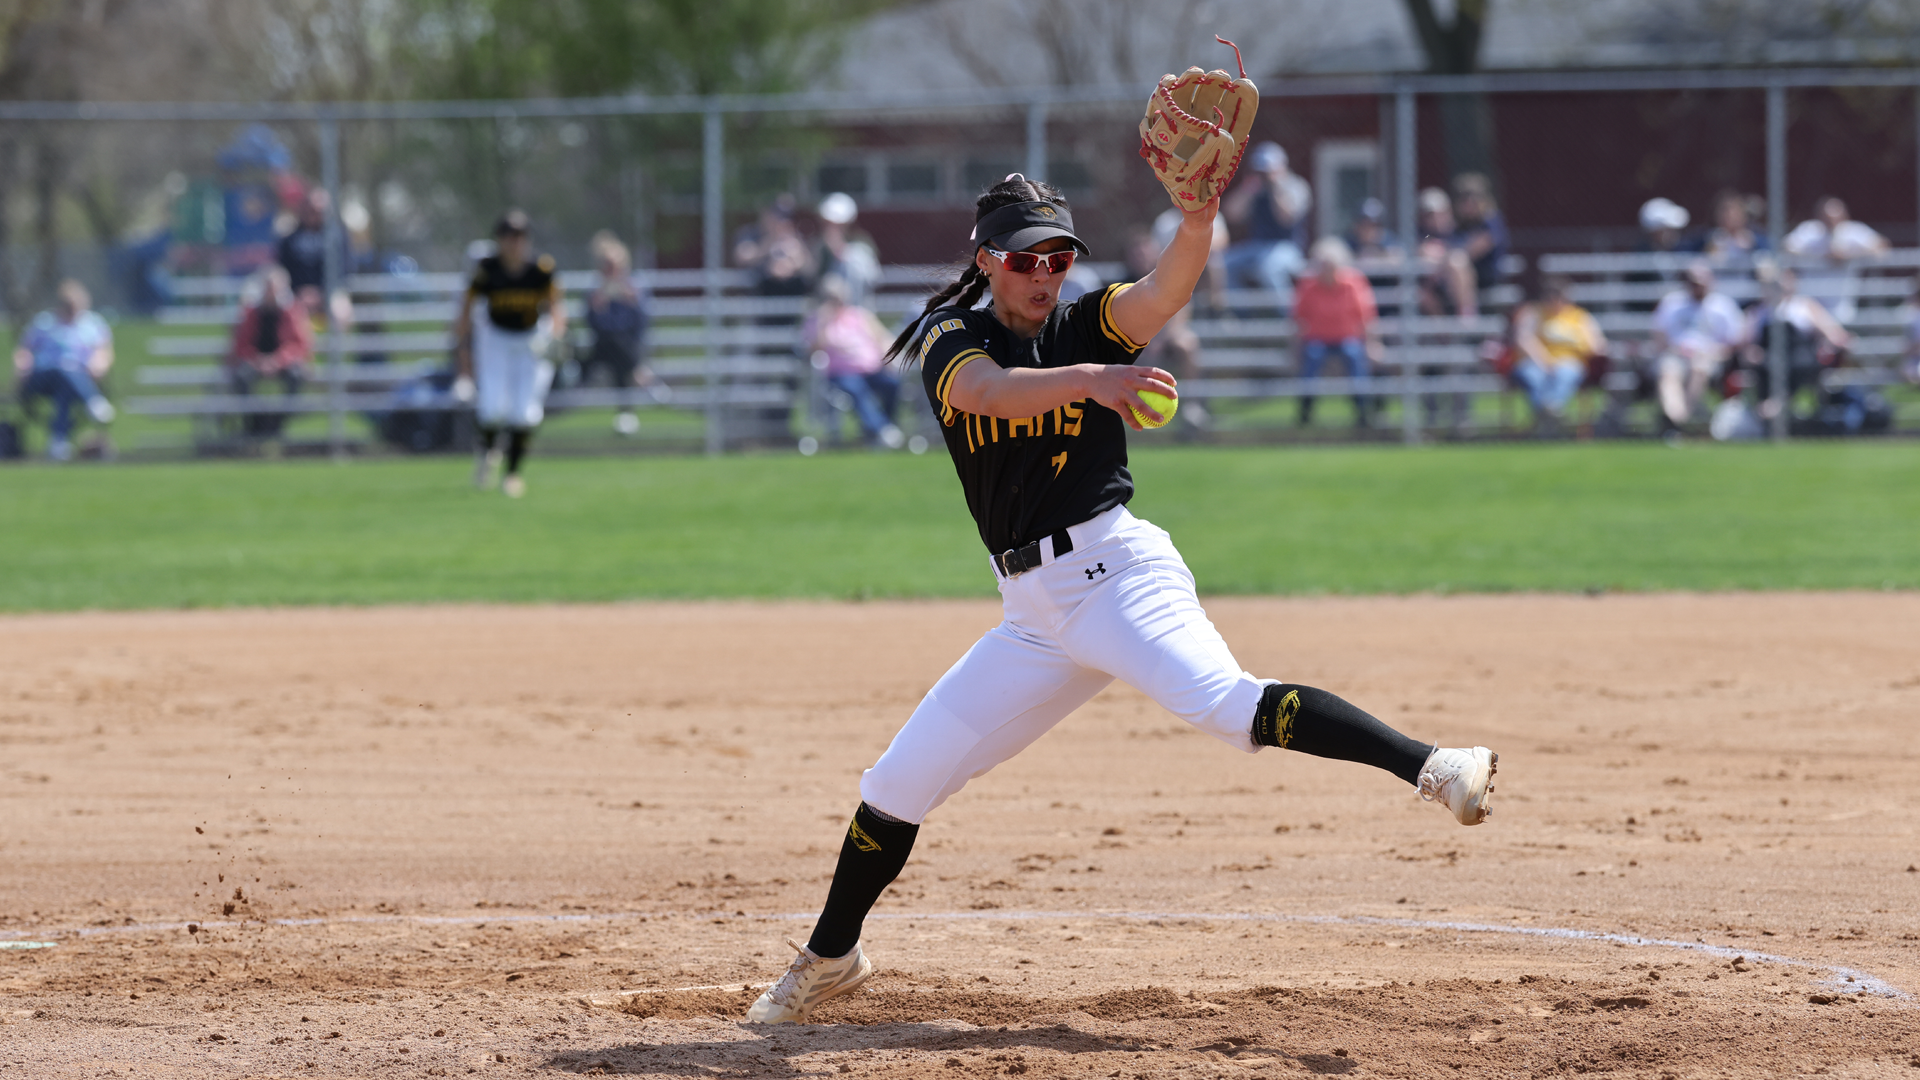 Abby Freismuth struck out three batters in her complete game win over the Blue Devils on Saturday. Photo Credit: Steve Frommell, UW-Oshkosh Sports Information